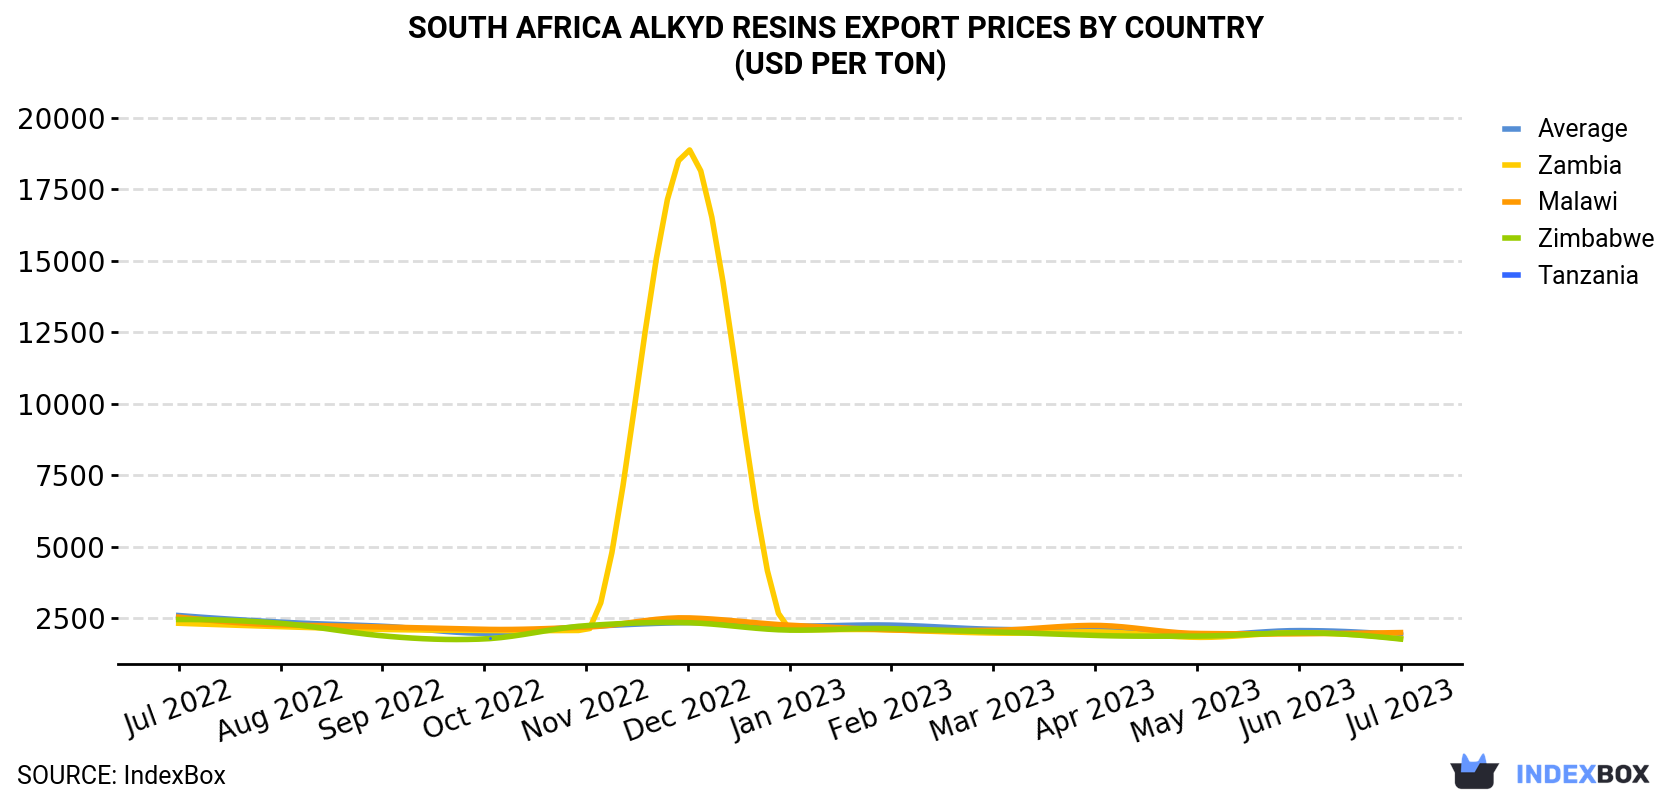 South Africa Alkyd Resins Export Prices By Country (USD Per Ton)